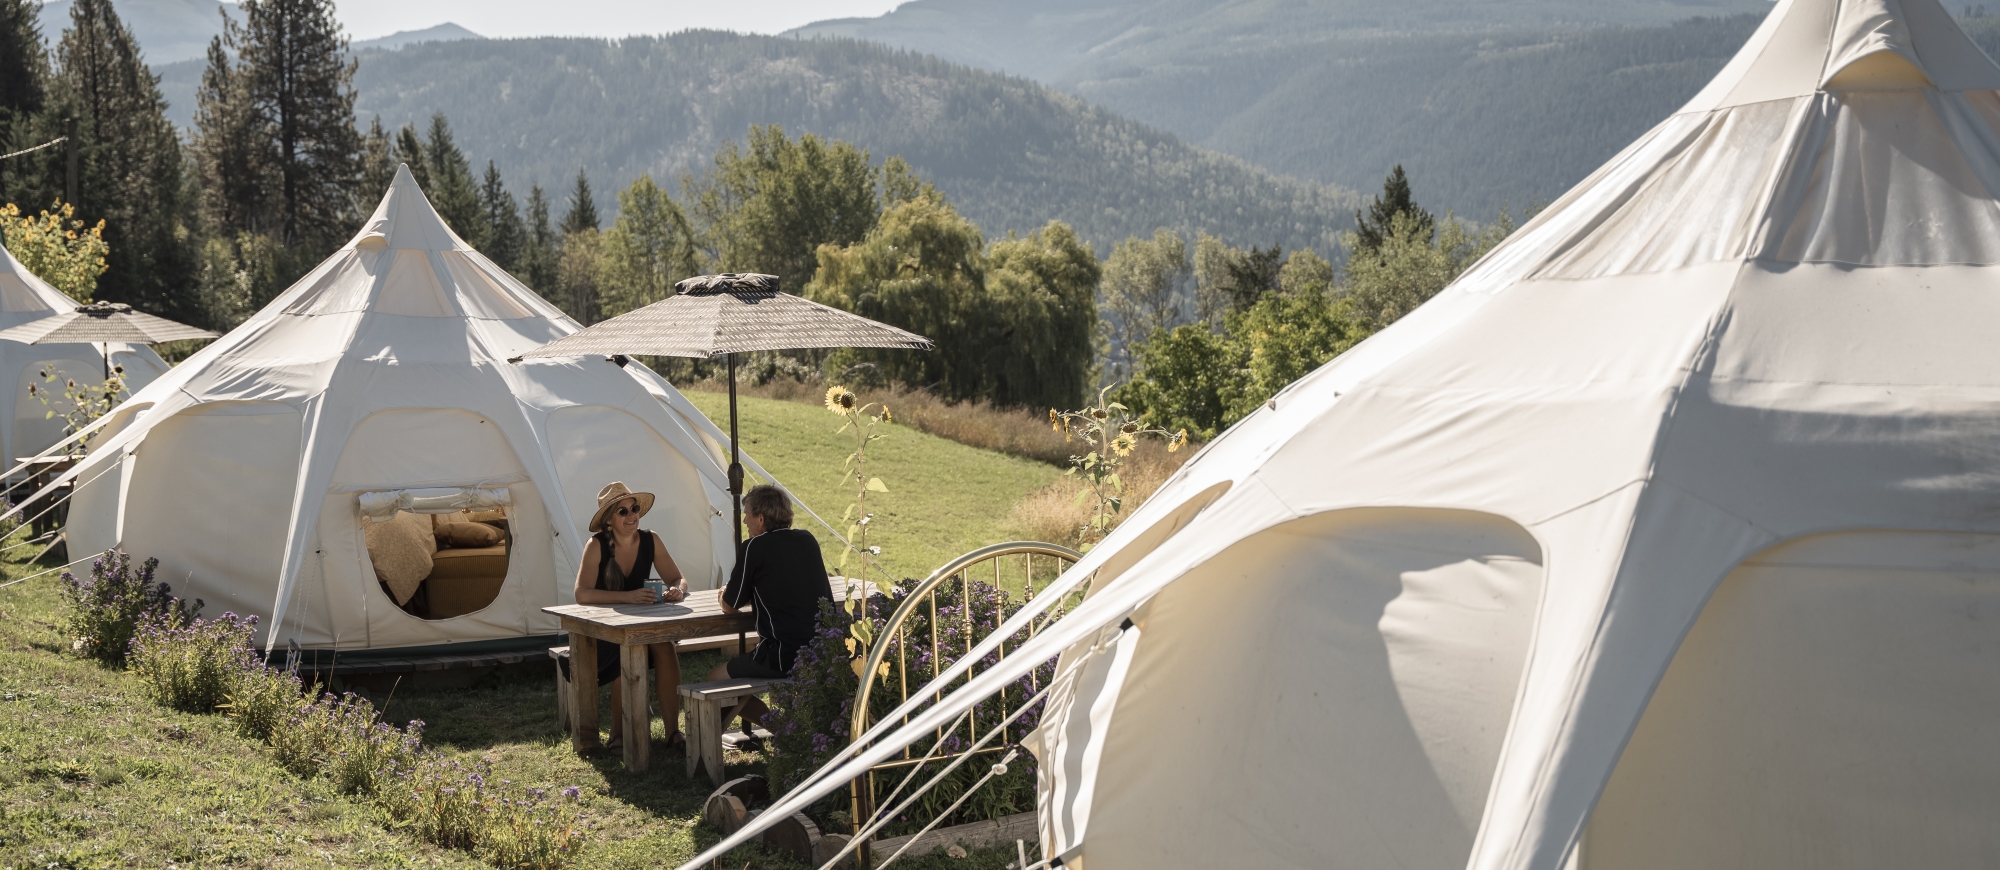 Two people sitting at a picnic table surrounded by mountains and glamping tents.